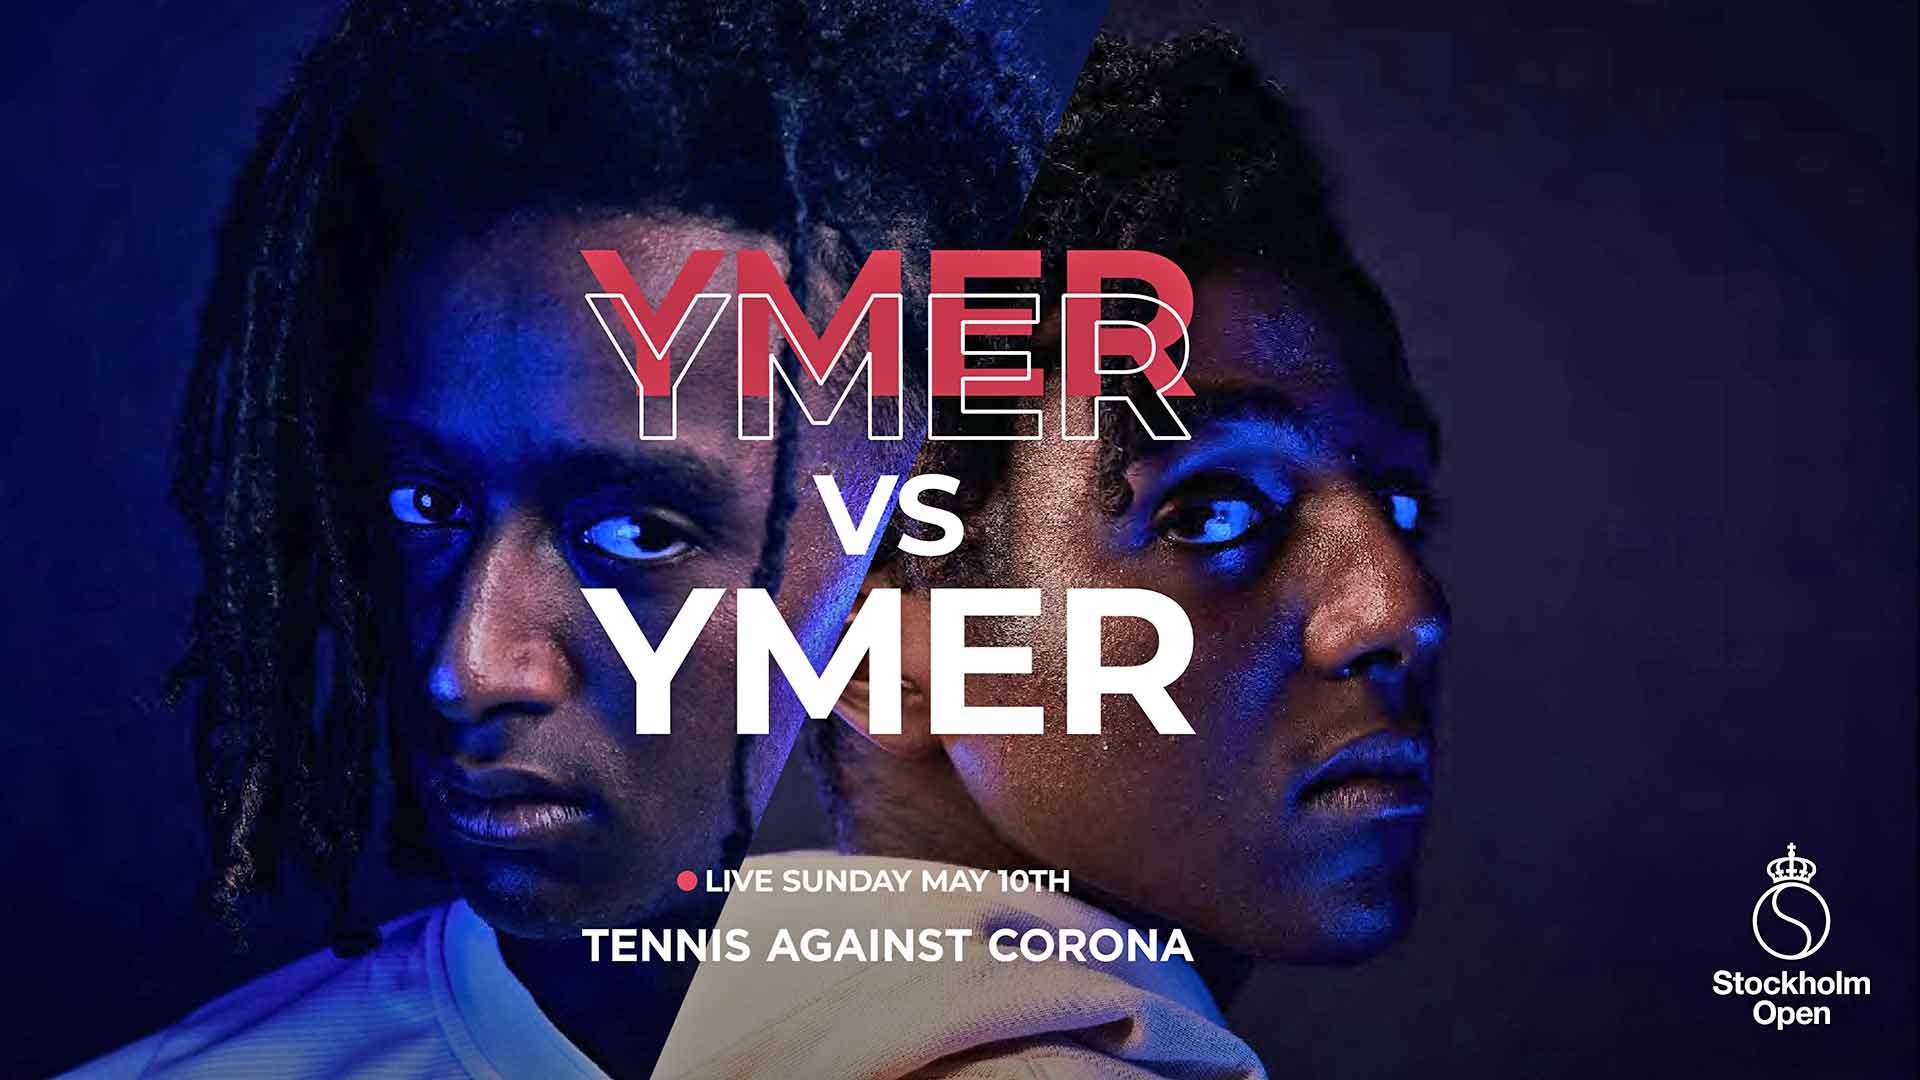 Mikael Ymer and Elias Ymer will contest a best-of-three set match at Tennis Against Corona in Stockholm.